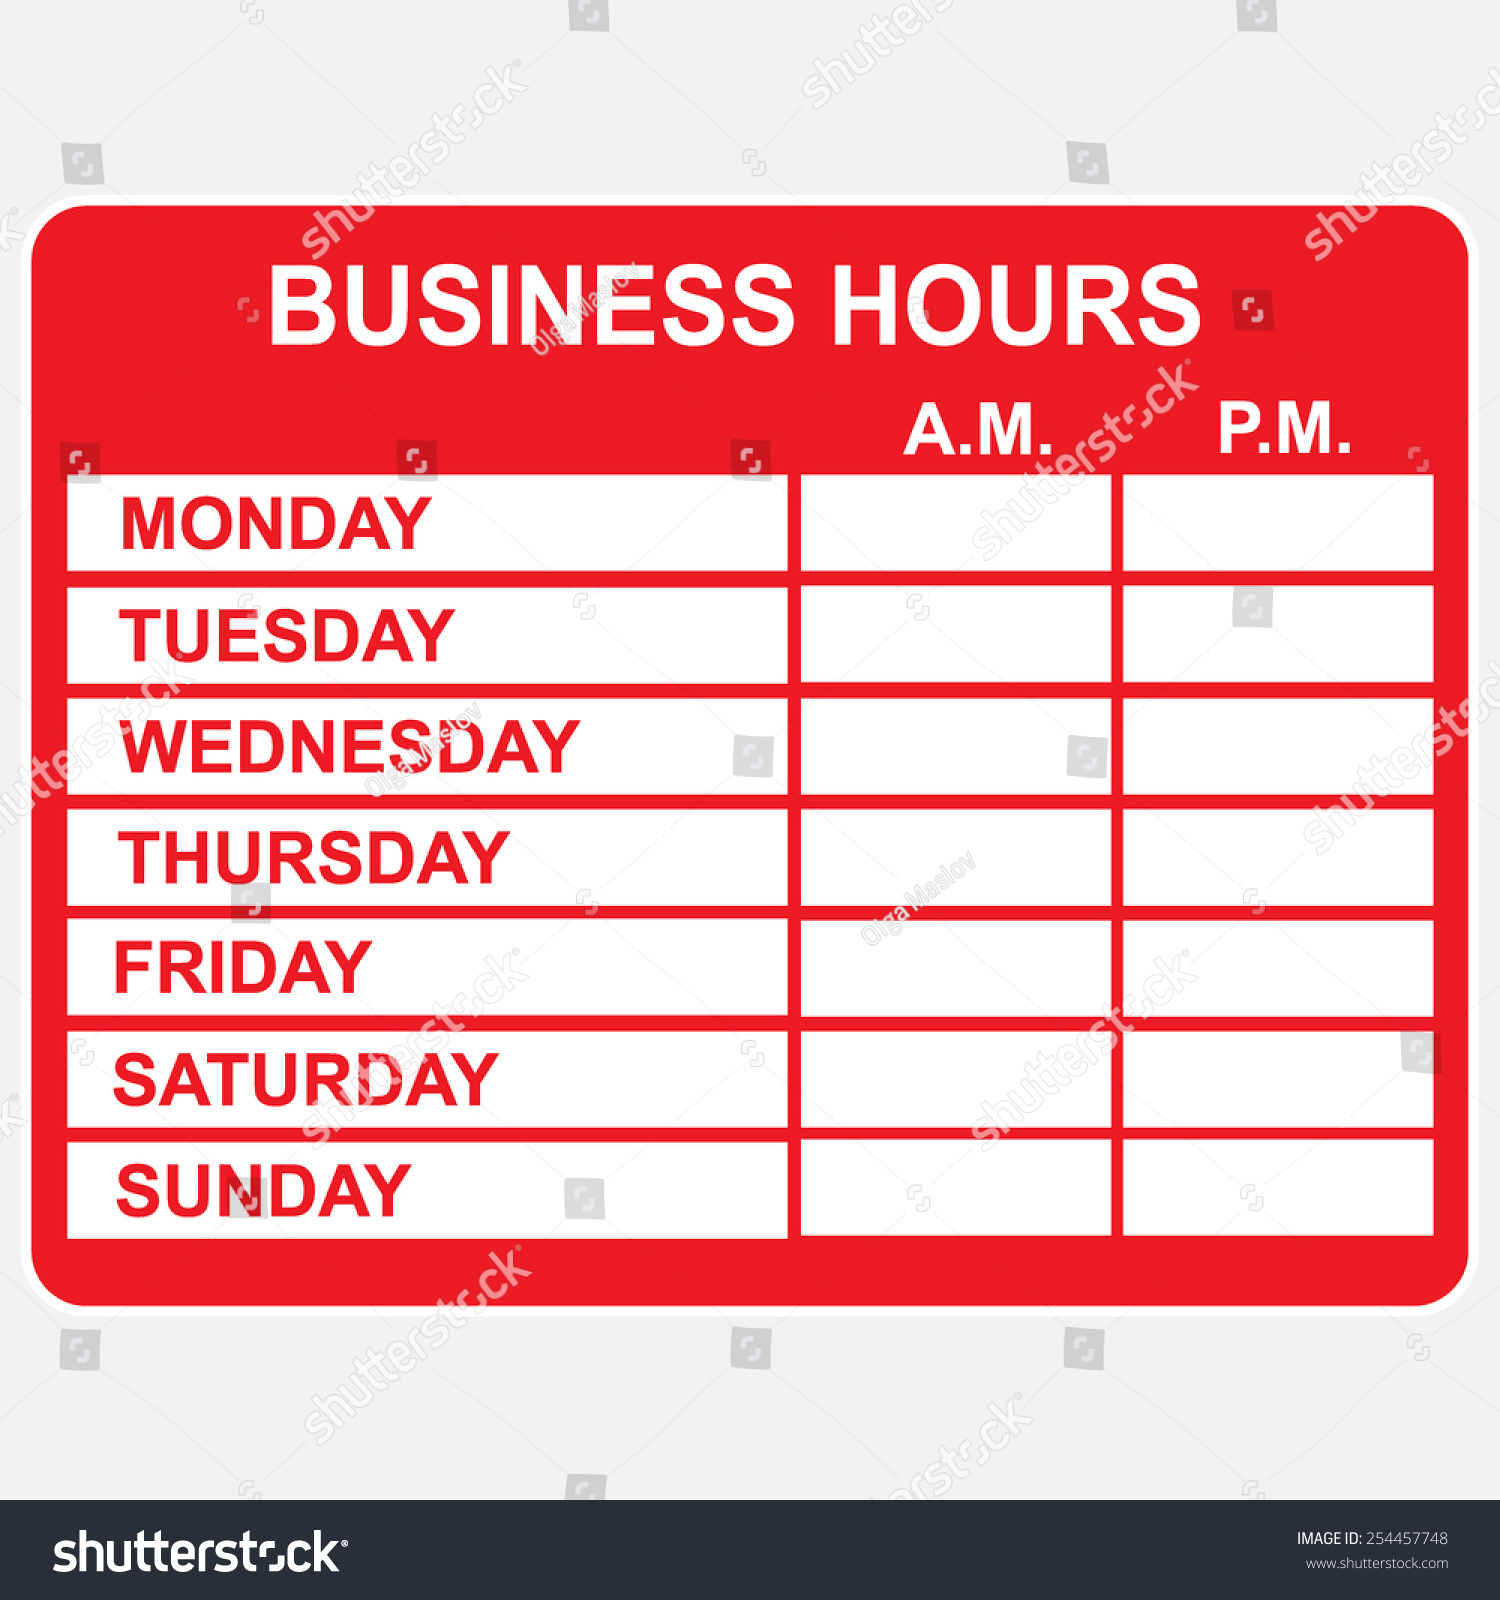 business hours clipart - photo #20